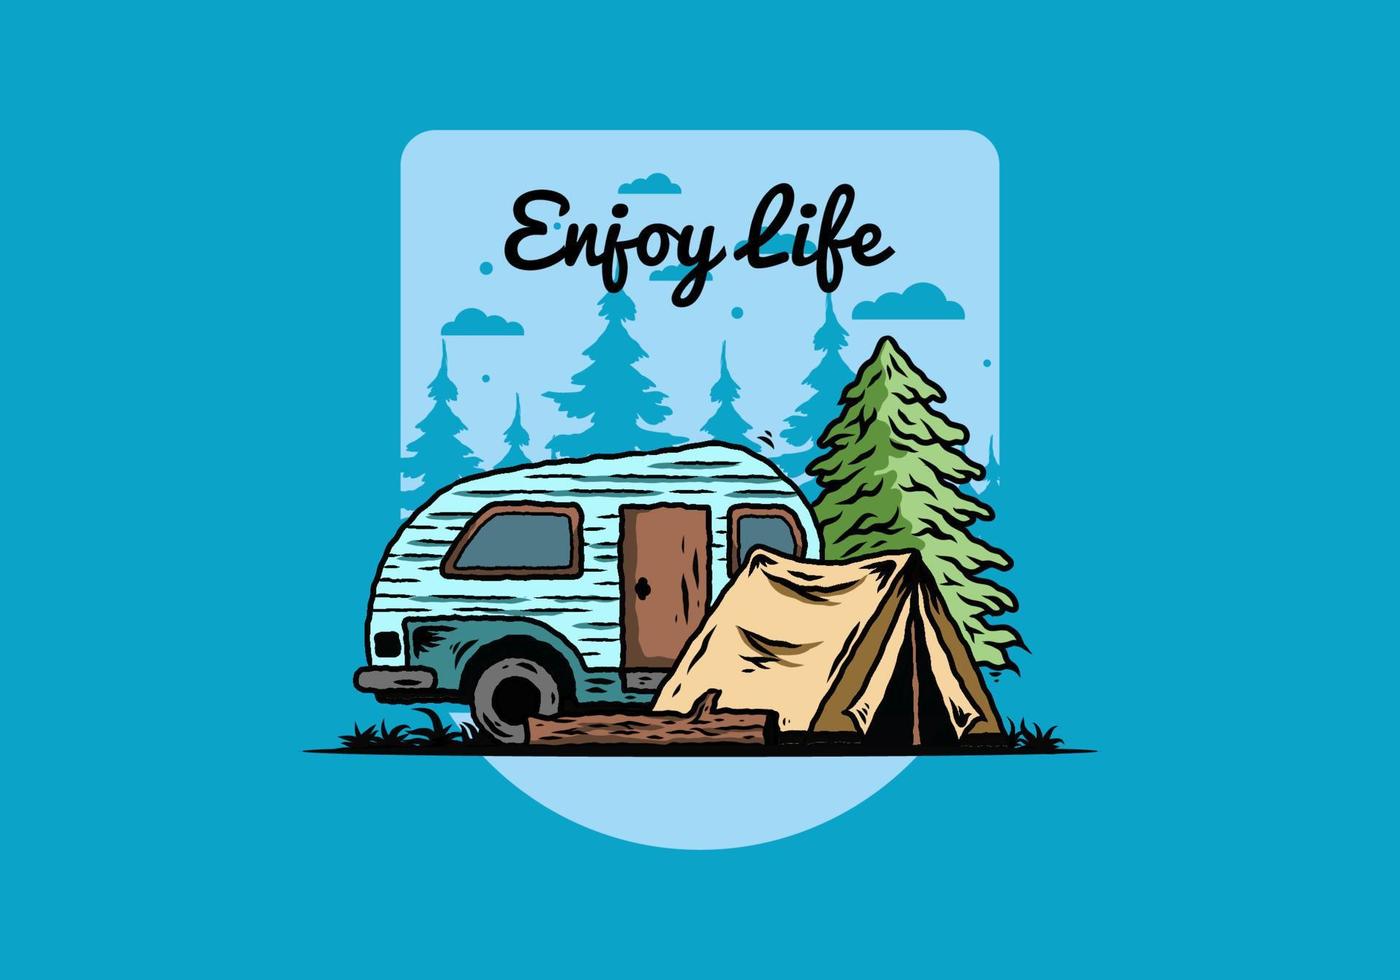 Teardrop camper and tent in front of pine tree illustration vector